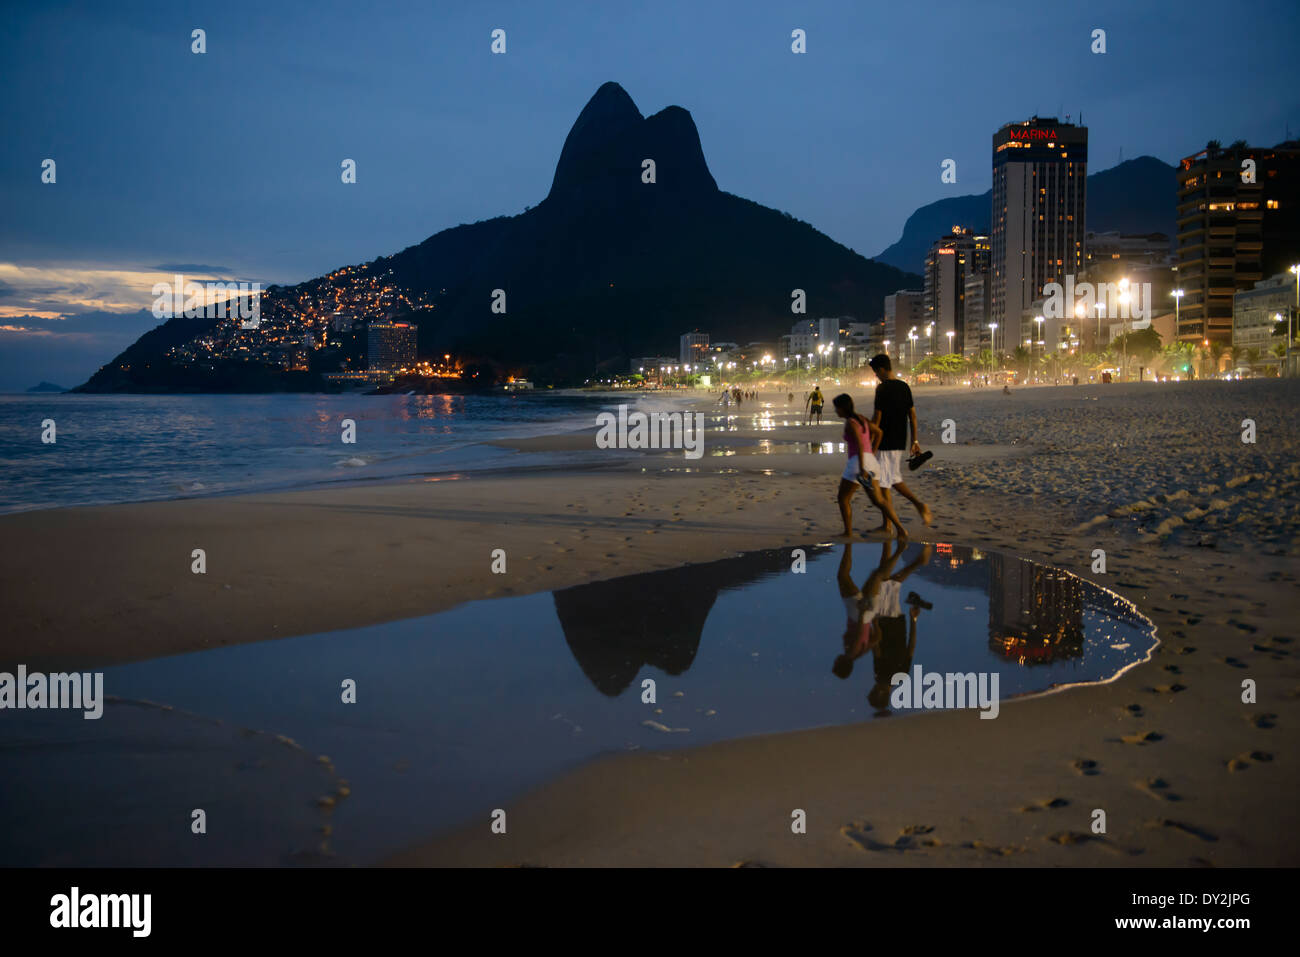 Couple walking along Ipanema beach at night,with twin peaks of Two Brothers mountain at Leblon, in background, Rio de Janeiro, B Stock Photo